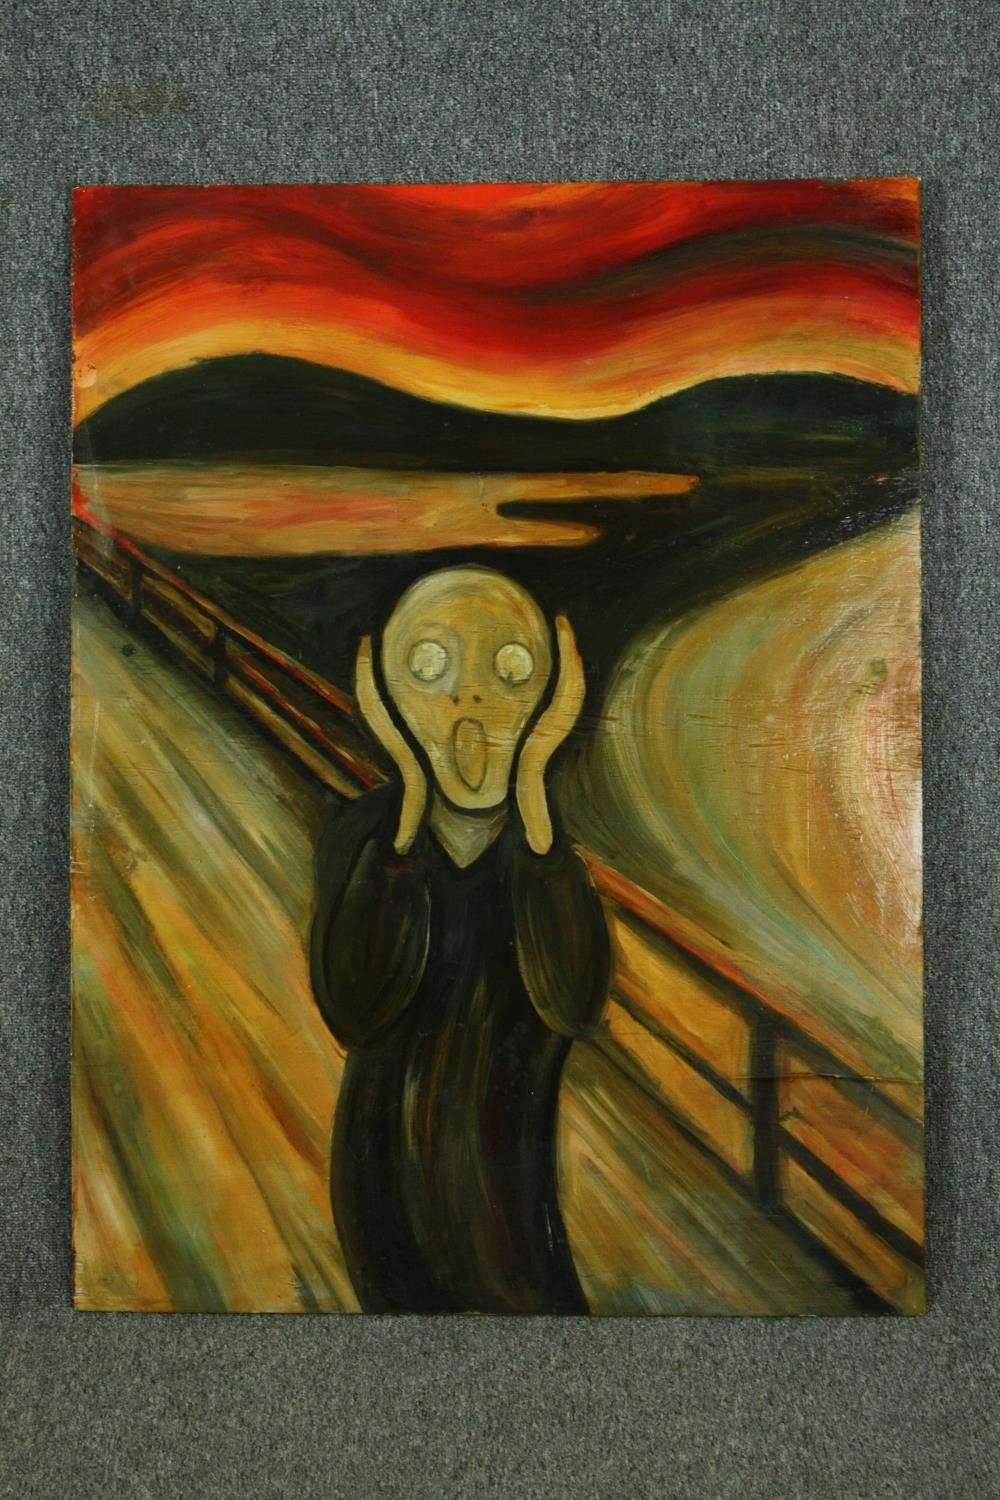 Artwork by Edvard Munch, The Scream, Made of oil on board